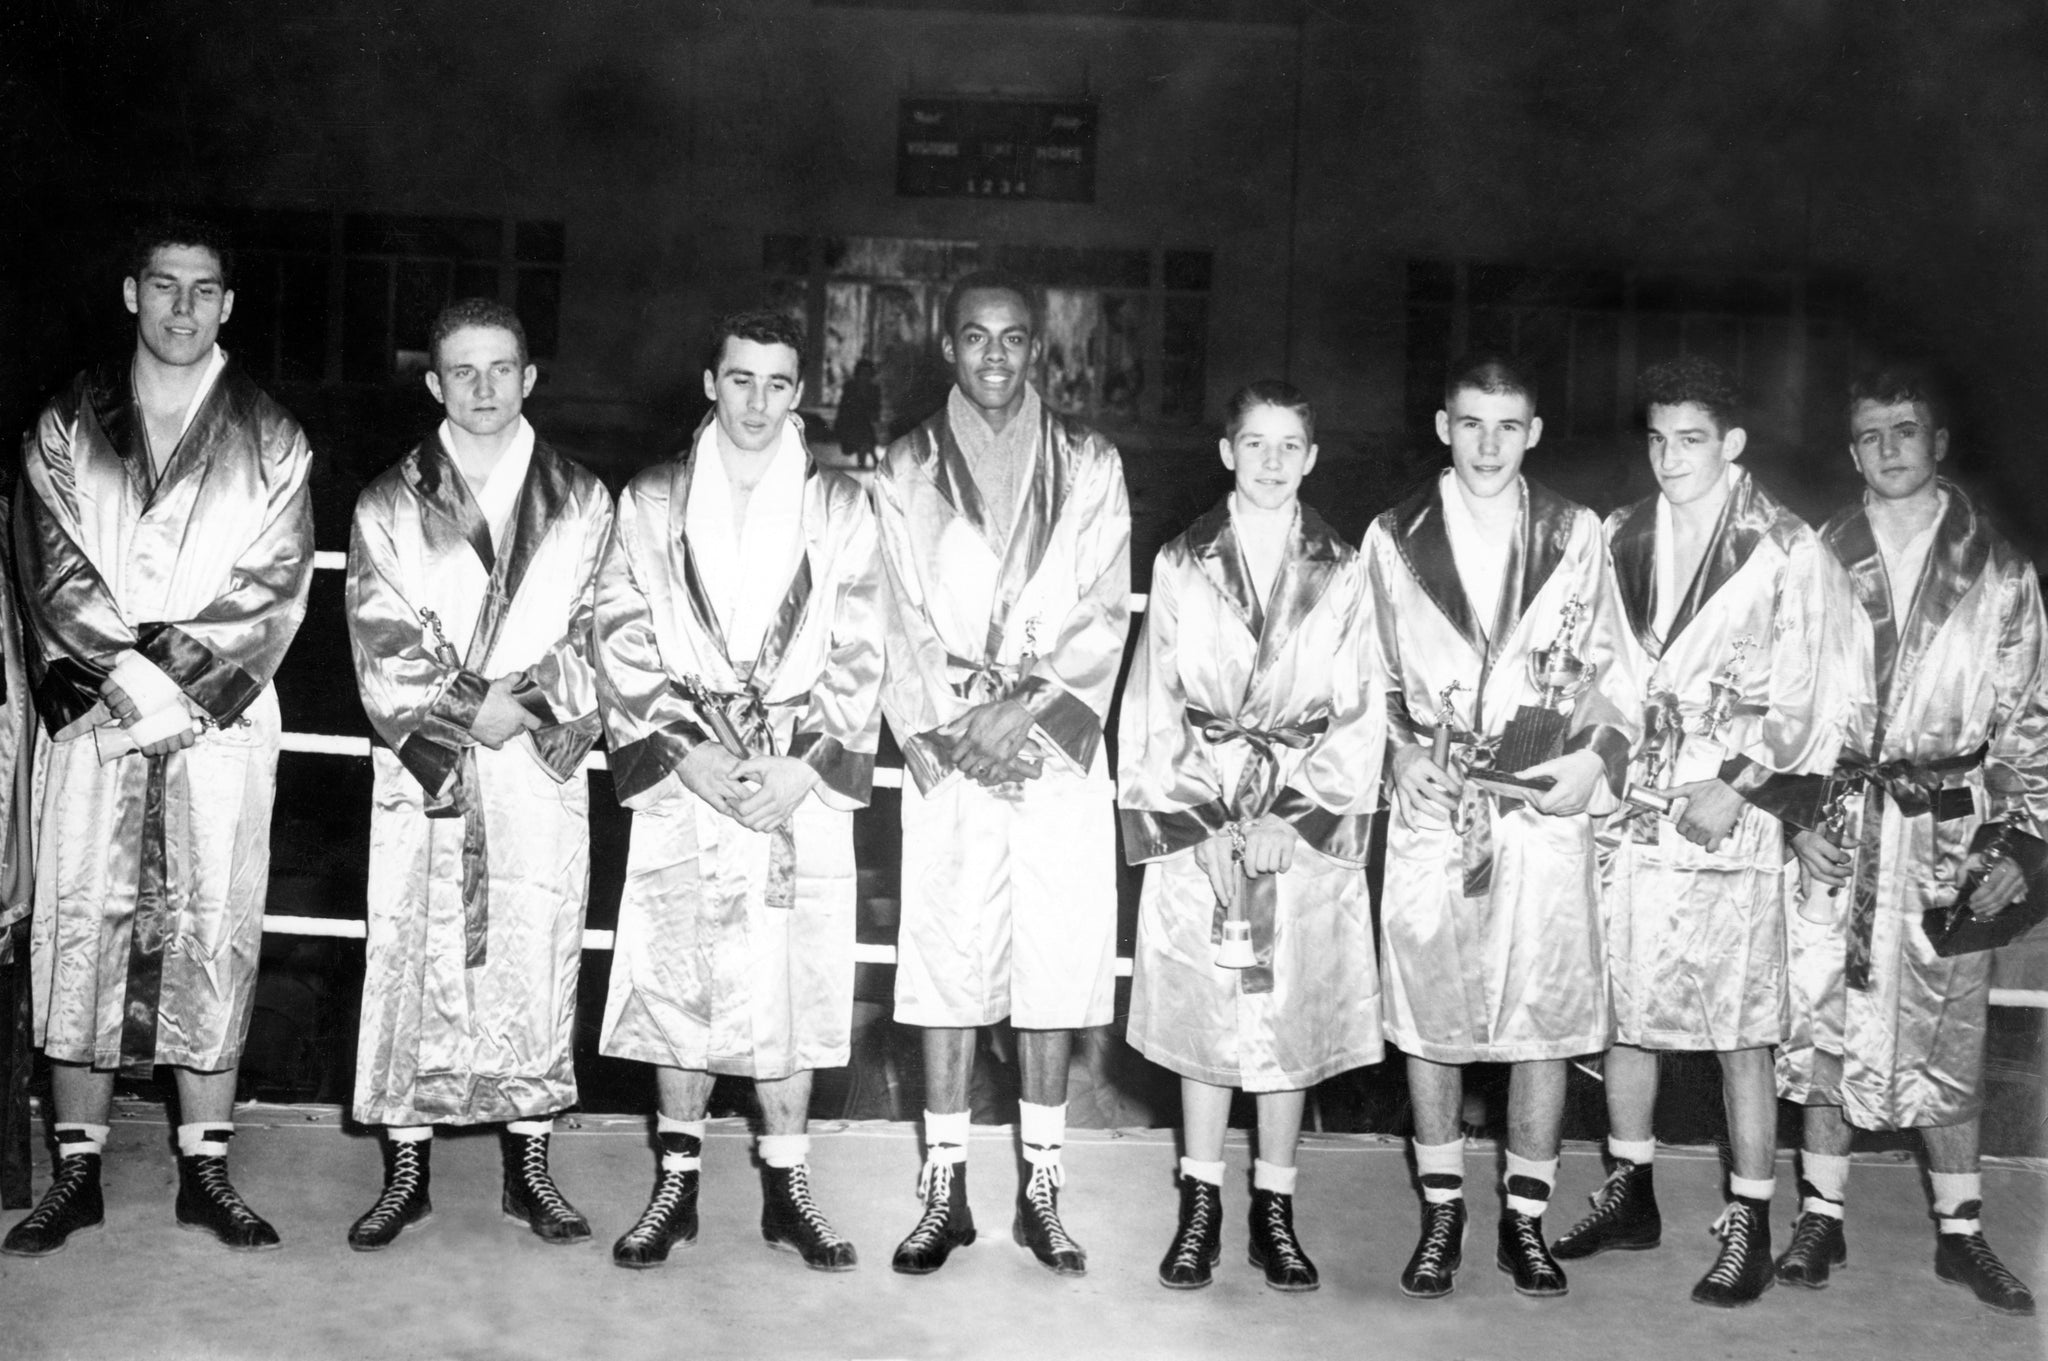 Competitors of the Golden Gloves Boxing Tournament at the Shrine Auditorium, 1958. Francis Turley is second from left. Wayne Bell is third from right. -- COURTESY WAYNE BELL